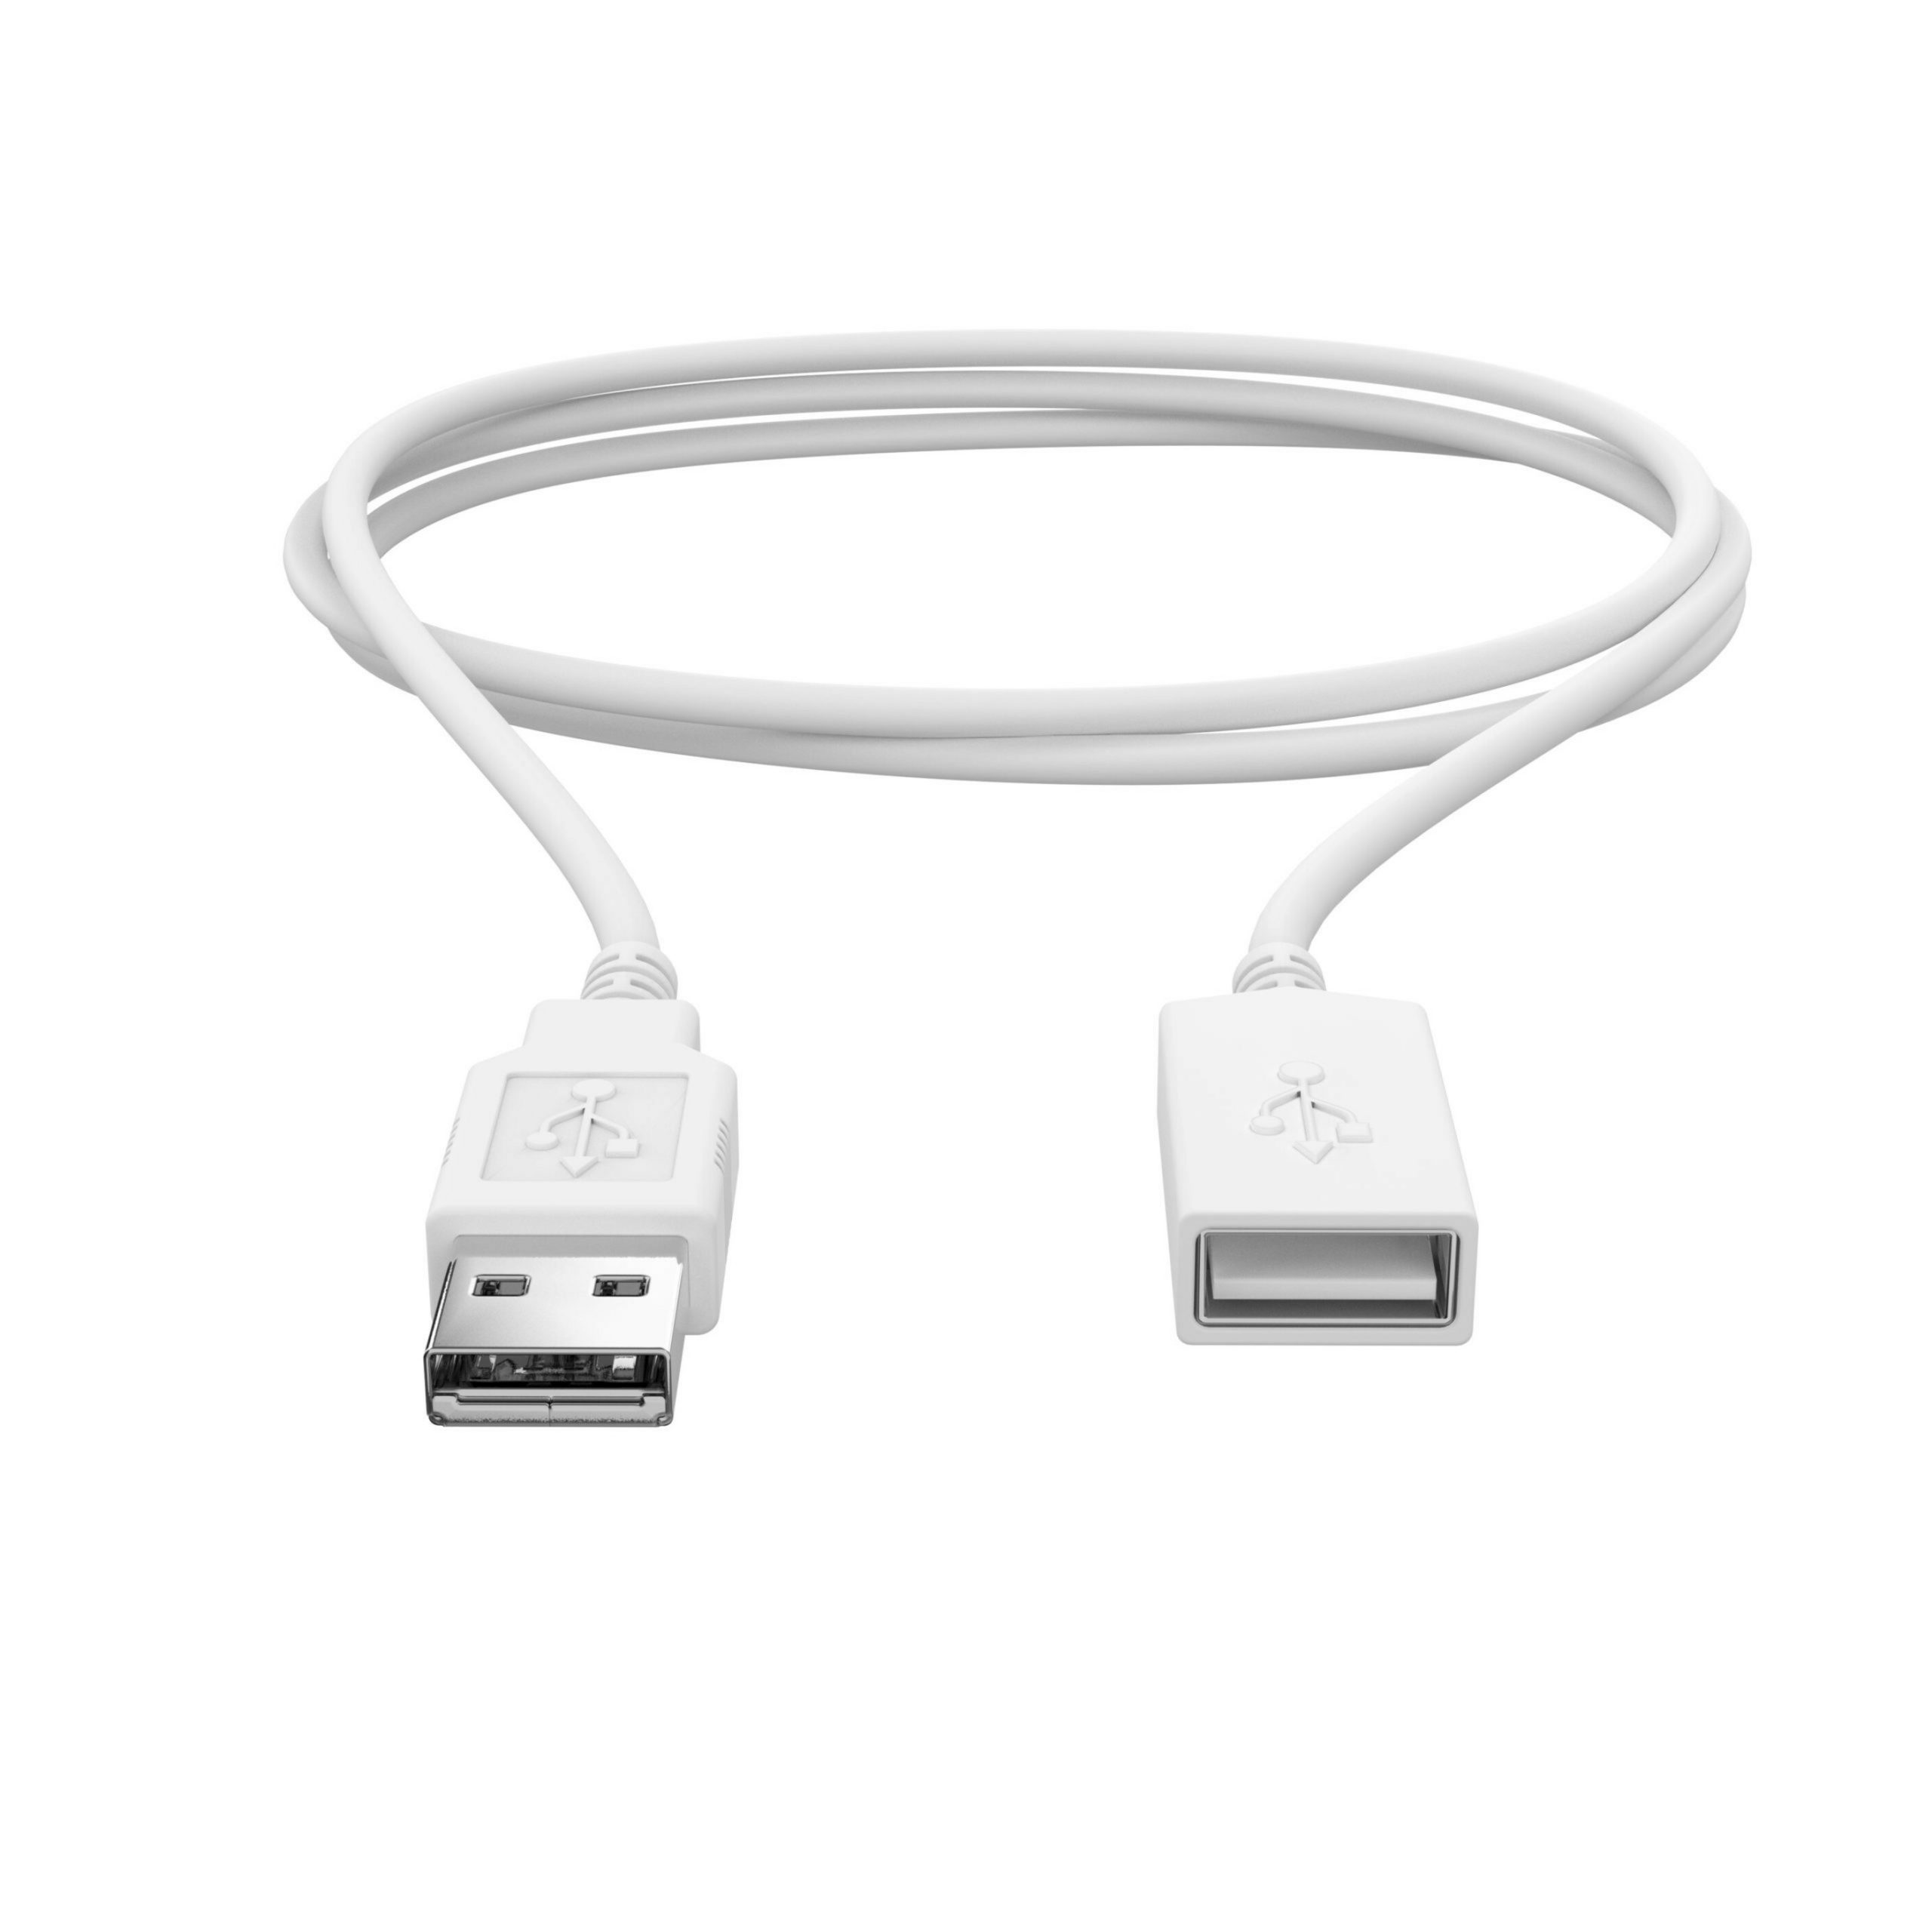 Cta Digital Accessories 6-Foot Male to Female USB 2.0 Cable (White)6 ft USB Data Transfer Cable for MAC, PCFirst End: 1 x USB 2.0 Type AMaleSec… ADD-USBW